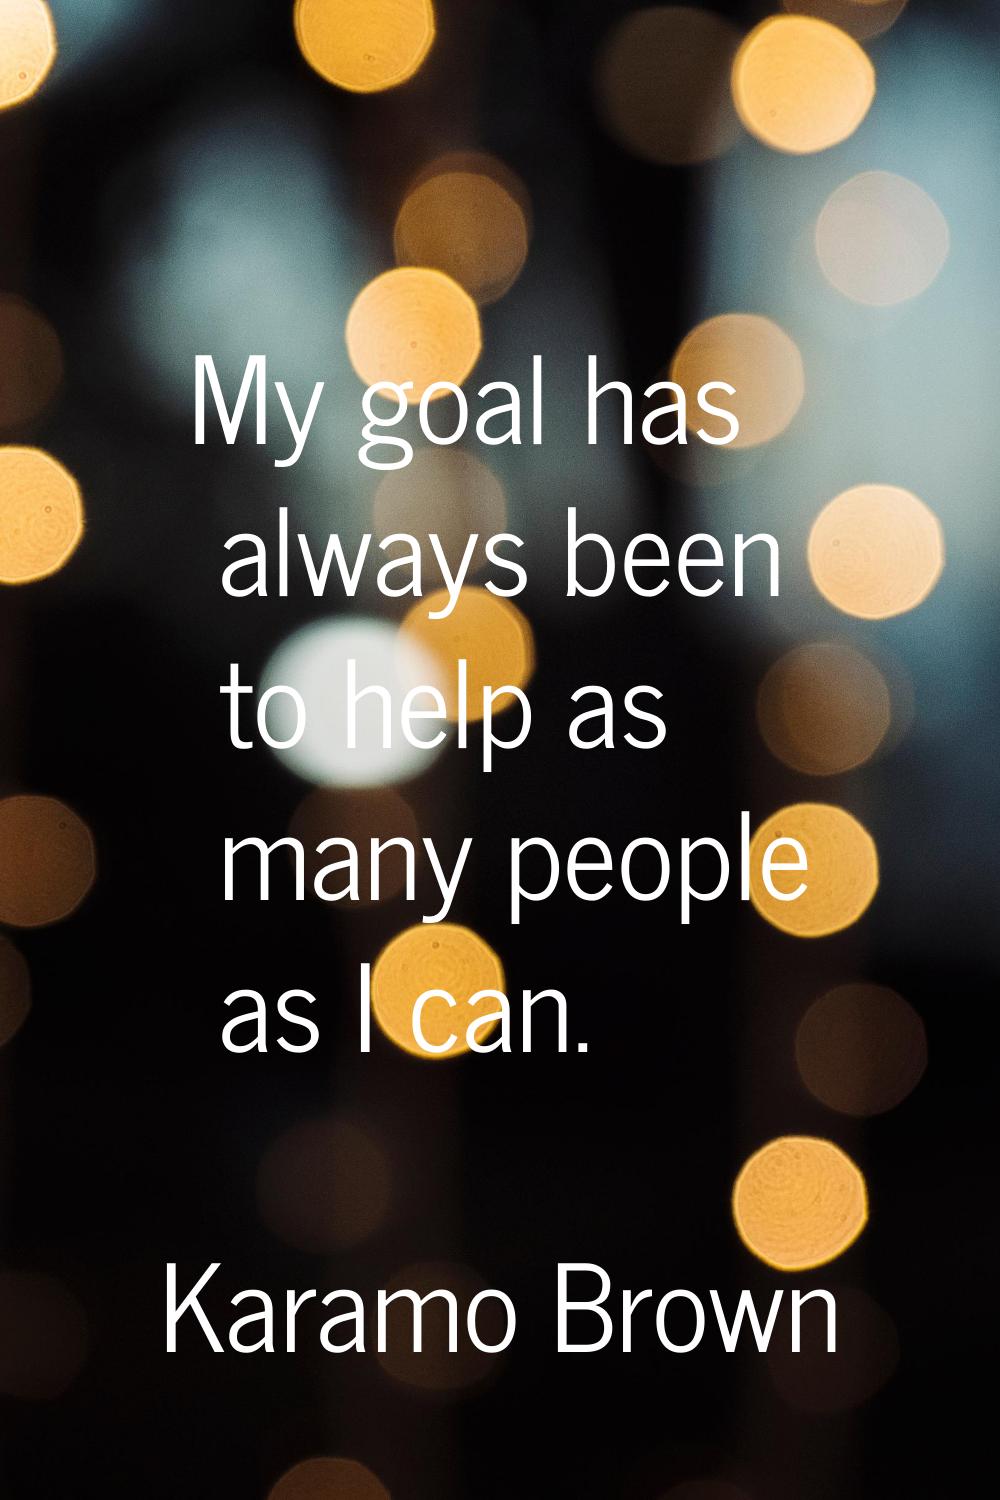 My goal has always been to help as many people as I can.